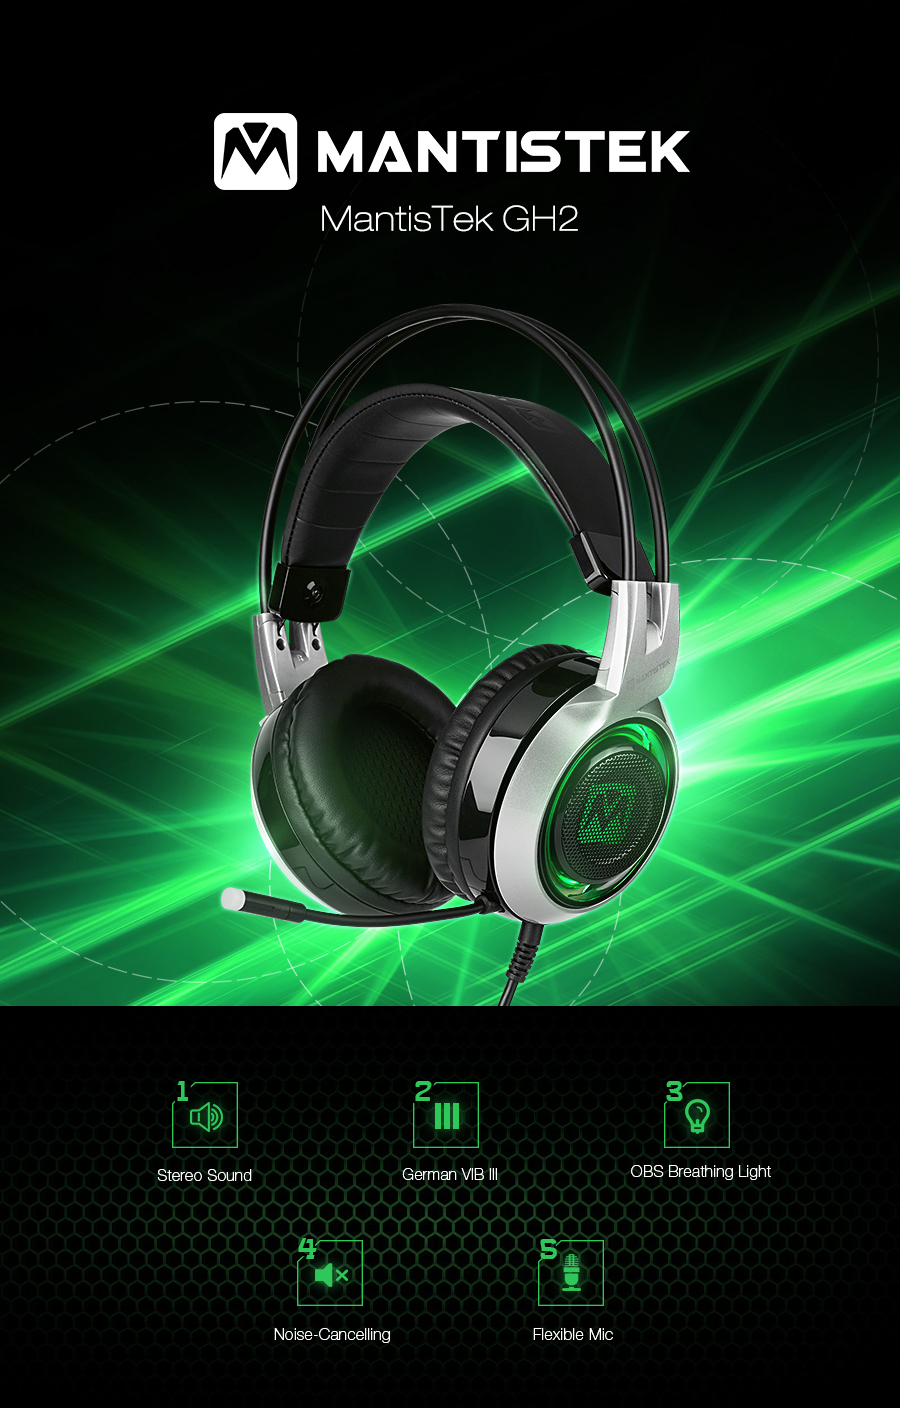 MantisTekreg-GH2-Smart-Vibration-Stereo-Noise-Canceling-Gaming-Headphone-with-Microphone-1194355-1